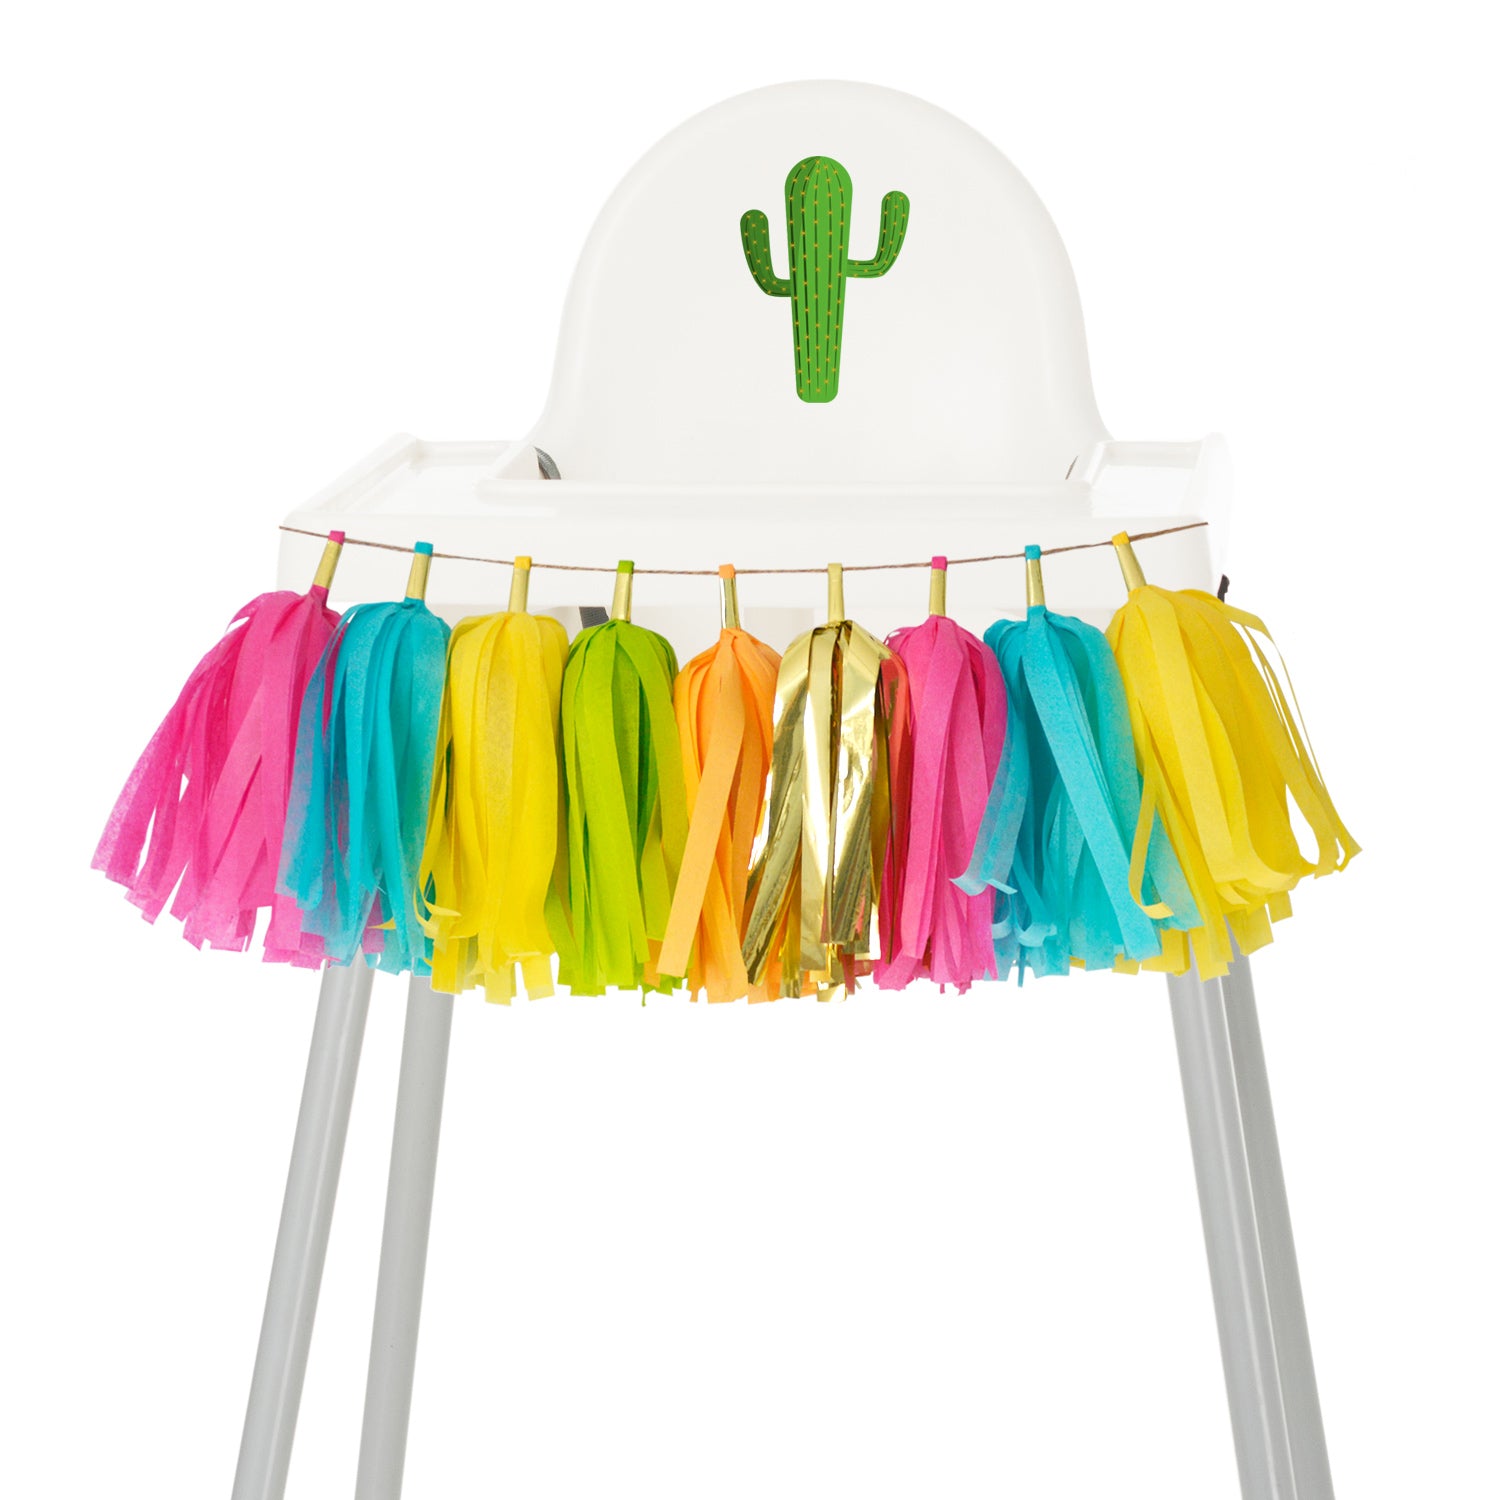 Fiesta High Chair Garland, Tropical Birthday Party, Flamingo Party Decor, Cactus Party Decor, First Birthday, Cake Smash. High Chair Banner